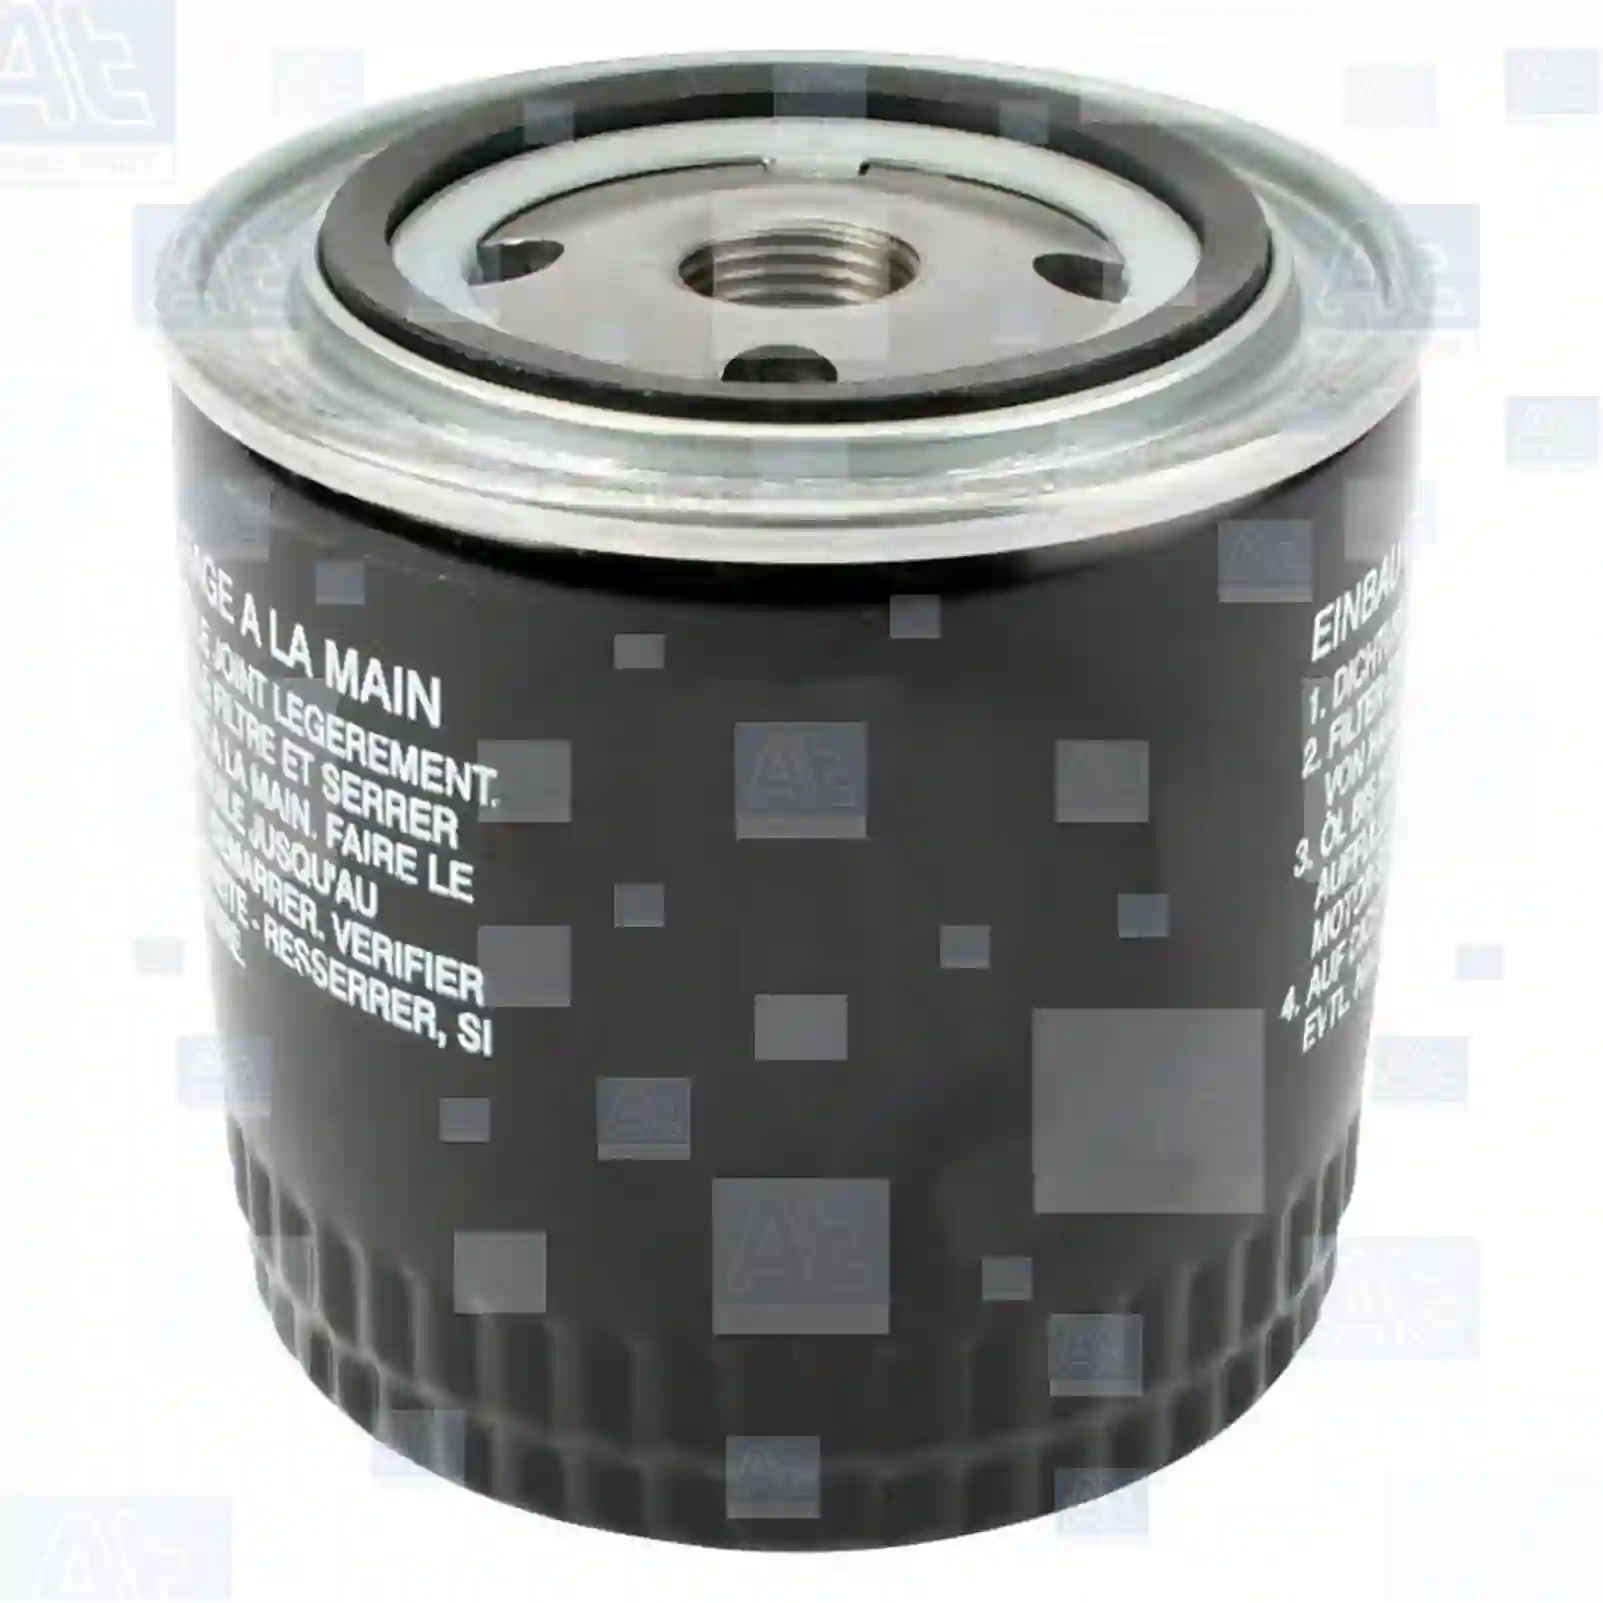 Oil filter, 77700223, 7825516, HB03028811, 7007007010006, 7007007021007, 00510313, 00510889, 00534372, 60507080, 224788, 7884256, 7973235, 7973429, W712, 1133277R1, 1133278R1, 3055228, 3055228R91, 3055228R93, 3055763, 3055765, 3056768, 3056768R91, 3132021, 3132021R91, 3132022, 3132022R91, 3132022R92, 3136458, 3136458R91, A46158, D062845, D62845, H334540, K200037, 377-6969, 383-0339, 9Y-4487, 9Y-4506, 2650396, 4041315, 4417559, 5041315, 5057957, 5281090, 75221405, 75221481, X3549957, 110929, 110931, 110945, 110946, 110955, 110978, 1109A0, 0006605760, 7701029278, 148459, 162097, 162997, 12G2400, 12H3274, 13H9090, 13H9104, 1500907, 1500928, ABU8536, RTC3799, 1560025010, 1560025010000, 1560087104, 1560087104000, 1560087307, 1560087307000, 1560125010, 1560187307, 1560187307000, 40111834, 401118834, 03003477, 10654074, 0141151201, 141151110, 141151201, 12153174, 7007007010006, 7007007021007, 5281090, 1620482M1, 2680600565, 11464497, 11542957, F120203310170, 04286051, 04316238, 04335580, 04343591, 04363485, 04434790, 05951685, 05951865, 05951895, 05964796, 05965796, 07075753, 07300943, 71134825, 74434825, 78511654, Y03727812, 1457512, 1482151, 1498014, 1498020, 1498021, 1508831, 1515160, 1536304, 1553370, 1556297, 1559937, 1564767, 1565486, 1641158, 464498, 5000860, 5001248, 5001926, 5002097, 5002230, 5002457, 5002530, 5002677, 5002805, 5003329, 5003331, 5003559, 5003560, 5003561, 5003932, 5003968, 5010665, 5012035, 5012040, 5013143, 5013146, 5013319, 5013957, 5014055, 5016957, 6041176, 6061629, 6063340, DNP552290, 2008219, 1003000800690, 1003000800691, 11422189823, 5577618, 7961367, 7965051, 93156669, 9975120, 9975161, 5577618, 7961367, 7965051, 0009830606, 6031840025, 6031840125, 263A107021, 62M01198110, 019468, 0229651, HH1CO-32430, 3055229R91, 3136458R91, 3136459R91, 00620751, 01903790, 02/630795, 5281090, AM31205, AM35176, AM37025, AM38441, 06501613, 06502613, 03357461, 06501613, 141151201, L24R, L63, 15056-3243-2, 16098-3129-1, 16271-3209-2, 19000-1206, 1C010-3243-0, 1C020-3243-0, HH1C0-3243-0, HH1CO-3243-0, W21ES-O1C0-0, 210101012005, 21011012005, 210110120051, 210501012005, 04434794, 05951865, 05951895, 05964796, 82342881, 82360558, 32821600, 05081070030, 06750258236, 1015511, 1041429, 1043369M91, 1620482M1, 9046817, 13052323802, 1N0114302, 60541180001, 605411880001, 605417880001, 808C01703E1, 15208-80W00, 15208-BN300, 15208-BN30A, 15208-W1106, A5208-W1103, A5208-W1106, 1220185, 122A185, 620751, 770286, 140516130, 110929, 110931, 110945, 110946, 110955, 110978, 1109A0, 0008558238, 0008558910, 0500010031, 0855823800, 5000100351, 5000789225, 5000790022, 5001846635, 6005019727, 6005019740, 6005019759, 6005019763, 7700538153, 7700553733, 7700640165, 7700640175, 7701008698, 7701029278, 7701031111, 7701349151, 7701542286, HDS900, 10803467, 10806225, 12H3274, 801779, ABU8536, 800334, 880334, 24195304, 244191401, 173171, 7496144, 7894066, 914444, 9144445, 930957, 932037, 9320375, 8312000298, 209070087, 2090787, 4060716, 418432, 5041315, 75221405, 75221581, 7910244815, 7910246815, 00120-00001, 00120-00007, 15600-05600, 15600-13050, 15600-20550, 15600-25010, 15600-25070, 15600-87104, 15600-87307, 15600-96001, 15601-20550, 15601-20571, 15601-25010, 15601-78001, 15601-87307, 15601-96001, 15601-96006, 90915-40001, 220530, 3316074, 3338201, 7007007010000, 6231459, 7413694, 7897321, 79078234, 79270542, 8614752, 021115351A, ZG01696-0008 ||  77700223 At Spare Part | Engine, Accelerator Pedal, Camshaft, Connecting Rod, Crankcase, Crankshaft, Cylinder Head, Engine Suspension Mountings, Exhaust Manifold, Exhaust Gas Recirculation, Filter Kits, Flywheel Housing, General Overhaul Kits, Engine, Intake Manifold, Oil Cleaner, Oil Cooler, Oil Filter, Oil Pump, Oil Sump, Piston & Liner, Sensor & Switch, Timing Case, Turbocharger, Cooling System, Belt Tensioner, Coolant Filter, Coolant Pipe, Corrosion Prevention Agent, Drive, Expansion Tank, Fan, Intercooler, Monitors & Gauges, Radiator, Thermostat, V-Belt / Timing belt, Water Pump, Fuel System, Electronical Injector Unit, Feed Pump, Fuel Filter, cpl., Fuel Gauge Sender,  Fuel Line, Fuel Pump, Fuel Tank, Injection Line Kit, Injection Pump, Exhaust System, Clutch & Pedal, Gearbox, Propeller Shaft, Axles, Brake System, Hubs & Wheels, Suspension, Leaf Spring, Universal Parts / Accessories, Steering, Electrical System, Cabin Oil filter, 77700223, 7825516, HB03028811, 7007007010006, 7007007021007, 00510313, 00510889, 00534372, 60507080, 224788, 7884256, 7973235, 7973429, W712, 1133277R1, 1133278R1, 3055228, 3055228R91, 3055228R93, 3055763, 3055765, 3056768, 3056768R91, 3132021, 3132021R91, 3132022, 3132022R91, 3132022R92, 3136458, 3136458R91, A46158, D062845, D62845, H334540, K200037, 377-6969, 383-0339, 9Y-4487, 9Y-4506, 2650396, 4041315, 4417559, 5041315, 5057957, 5281090, 75221405, 75221481, X3549957, 110929, 110931, 110945, 110946, 110955, 110978, 1109A0, 0006605760, 7701029278, 148459, 162097, 162997, 12G2400, 12H3274, 13H9090, 13H9104, 1500907, 1500928, ABU8536, RTC3799, 1560025010, 1560025010000, 1560087104, 1560087104000, 1560087307, 1560087307000, 1560125010, 1560187307, 1560187307000, 40111834, 401118834, 03003477, 10654074, 0141151201, 141151110, 141151201, 12153174, 7007007010006, 7007007021007, 5281090, 1620482M1, 2680600565, 11464497, 11542957, F120203310170, 04286051, 04316238, 04335580, 04343591, 04363485, 04434790, 05951685, 05951865, 05951895, 05964796, 05965796, 07075753, 07300943, 71134825, 74434825, 78511654, Y03727812, 1457512, 1482151, 1498014, 1498020, 1498021, 1508831, 1515160, 1536304, 1553370, 1556297, 1559937, 1564767, 1565486, 1641158, 464498, 5000860, 5001248, 5001926, 5002097, 5002230, 5002457, 5002530, 5002677, 5002805, 5003329, 5003331, 5003559, 5003560, 5003561, 5003932, 5003968, 5010665, 5012035, 5012040, 5013143, 5013146, 5013319, 5013957, 5014055, 5016957, 6041176, 6061629, 6063340, DNP552290, 2008219, 1003000800690, 1003000800691, 11422189823, 5577618, 7961367, 7965051, 93156669, 9975120, 9975161, 5577618, 7961367, 7965051, 0009830606, 6031840025, 6031840125, 263A107021, 62M01198110, 019468, 0229651, HH1CO-32430, 3055229R91, 3136458R91, 3136459R91, 00620751, 01903790, 02/630795, 5281090, AM31205, AM35176, AM37025, AM38441, 06501613, 06502613, 03357461, 06501613, 141151201, L24R, L63, 15056-3243-2, 16098-3129-1, 16271-3209-2, 19000-1206, 1C010-3243-0, 1C020-3243-0, HH1C0-3243-0, HH1CO-3243-0, W21ES-O1C0-0, 210101012005, 21011012005, 210110120051, 210501012005, 04434794, 05951865, 05951895, 05964796, 82342881, 82360558, 32821600, 05081070030, 06750258236, 1015511, 1041429, 1043369M91, 1620482M1, 9046817, 13052323802, 1N0114302, 60541180001, 605411880001, 605417880001, 808C01703E1, 15208-80W00, 15208-BN300, 15208-BN30A, 15208-W1106, A5208-W1103, A5208-W1106, 1220185, 122A185, 620751, 770286, 140516130, 110929, 110931, 110945, 110946, 110955, 110978, 1109A0, 0008558238, 0008558910, 0500010031, 0855823800, 5000100351, 5000789225, 5000790022, 5001846635, 6005019727, 6005019740, 6005019759, 6005019763, 7700538153, 7700553733, 7700640165, 7700640175, 7701008698, 7701029278, 7701031111, 7701349151, 7701542286, HDS900, 10803467, 10806225, 12H3274, 801779, ABU8536, 800334, 880334, 24195304, 244191401, 173171, 7496144, 7894066, 914444, 9144445, 930957, 932037, 9320375, 8312000298, 209070087, 2090787, 4060716, 418432, 5041315, 75221405, 75221581, 7910244815, 7910246815, 00120-00001, 00120-00007, 15600-05600, 15600-13050, 15600-20550, 15600-25010, 15600-25070, 15600-87104, 15600-87307, 15600-96001, 15601-20550, 15601-20571, 15601-25010, 15601-78001, 15601-87307, 15601-96001, 15601-96006, 90915-40001, 220530, 3316074, 3338201, 7007007010000, 6231459, 7413694, 7897321, 79078234, 79270542, 8614752, 021115351A, ZG01696-0008 ||  77700223 At Spare Part | Engine, Accelerator Pedal, Camshaft, Connecting Rod, Crankcase, Crankshaft, Cylinder Head, Engine Suspension Mountings, Exhaust Manifold, Exhaust Gas Recirculation, Filter Kits, Flywheel Housing, General Overhaul Kits, Engine, Intake Manifold, Oil Cleaner, Oil Cooler, Oil Filter, Oil Pump, Oil Sump, Piston & Liner, Sensor & Switch, Timing Case, Turbocharger, Cooling System, Belt Tensioner, Coolant Filter, Coolant Pipe, Corrosion Prevention Agent, Drive, Expansion Tank, Fan, Intercooler, Monitors & Gauges, Radiator, Thermostat, V-Belt / Timing belt, Water Pump, Fuel System, Electronical Injector Unit, Feed Pump, Fuel Filter, cpl., Fuel Gauge Sender,  Fuel Line, Fuel Pump, Fuel Tank, Injection Line Kit, Injection Pump, Exhaust System, Clutch & Pedal, Gearbox, Propeller Shaft, Axles, Brake System, Hubs & Wheels, Suspension, Leaf Spring, Universal Parts / Accessories, Steering, Electrical System, Cabin